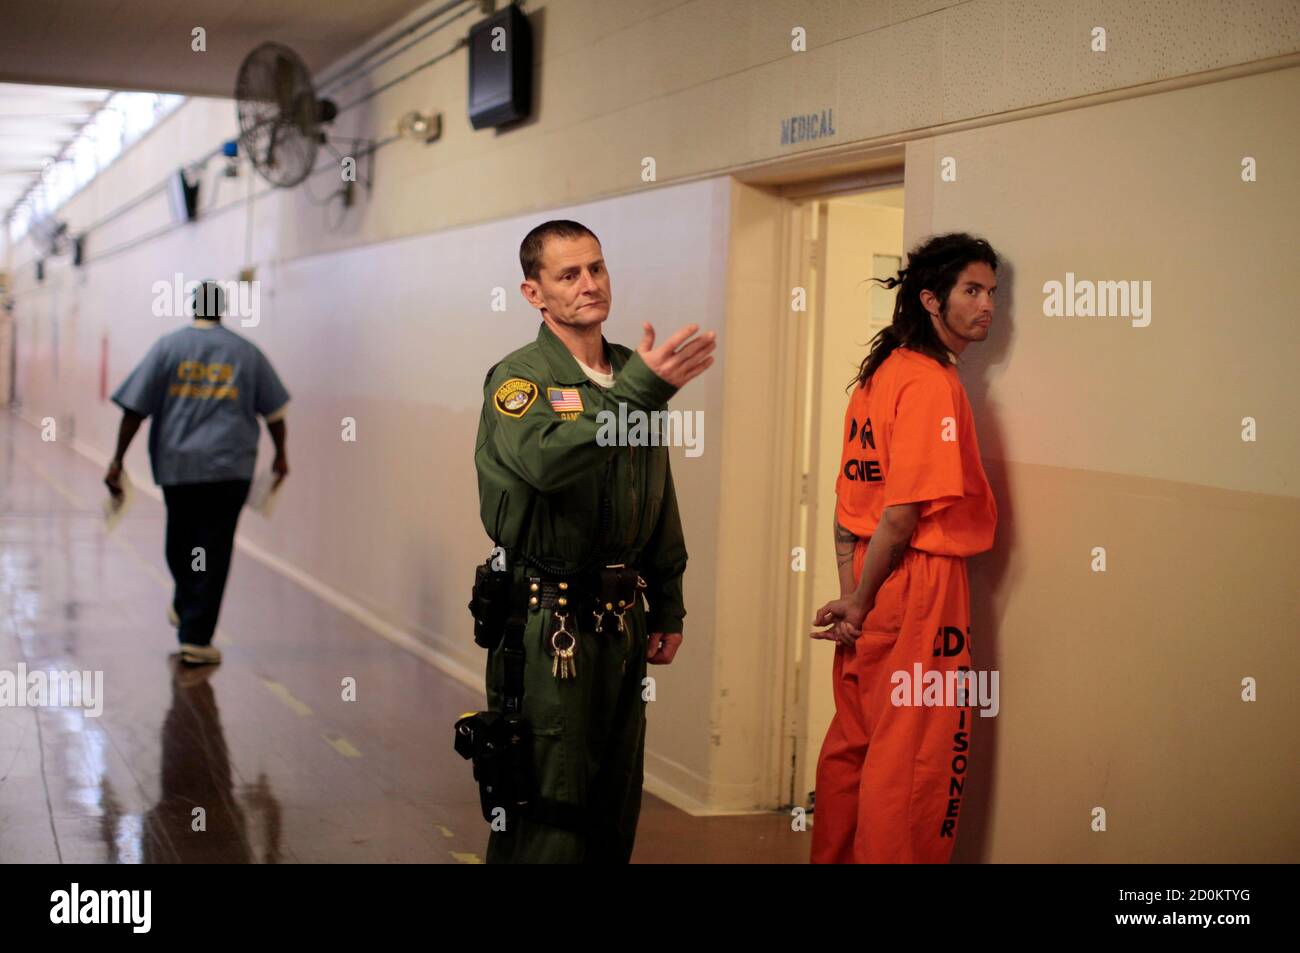 An inmate is led by a prison guard at the California Institution for Men state prison in Chino, California, June 3, 2011. The Supreme Court has ordered California to release more than 30,000 inmates over the next two years or take other steps to ease overcrowding in its prisons to prevent 'needless suffering and death.' California's 33 adult prisons were designed to hold about 80,000 inmates and now have about 145,000. The United States has more than 2 million people in state and local prisons. It has long had the highest incarceration rate in the world. REUTERS/Lucy Nicholson (UNITED STATES - Stock Photo